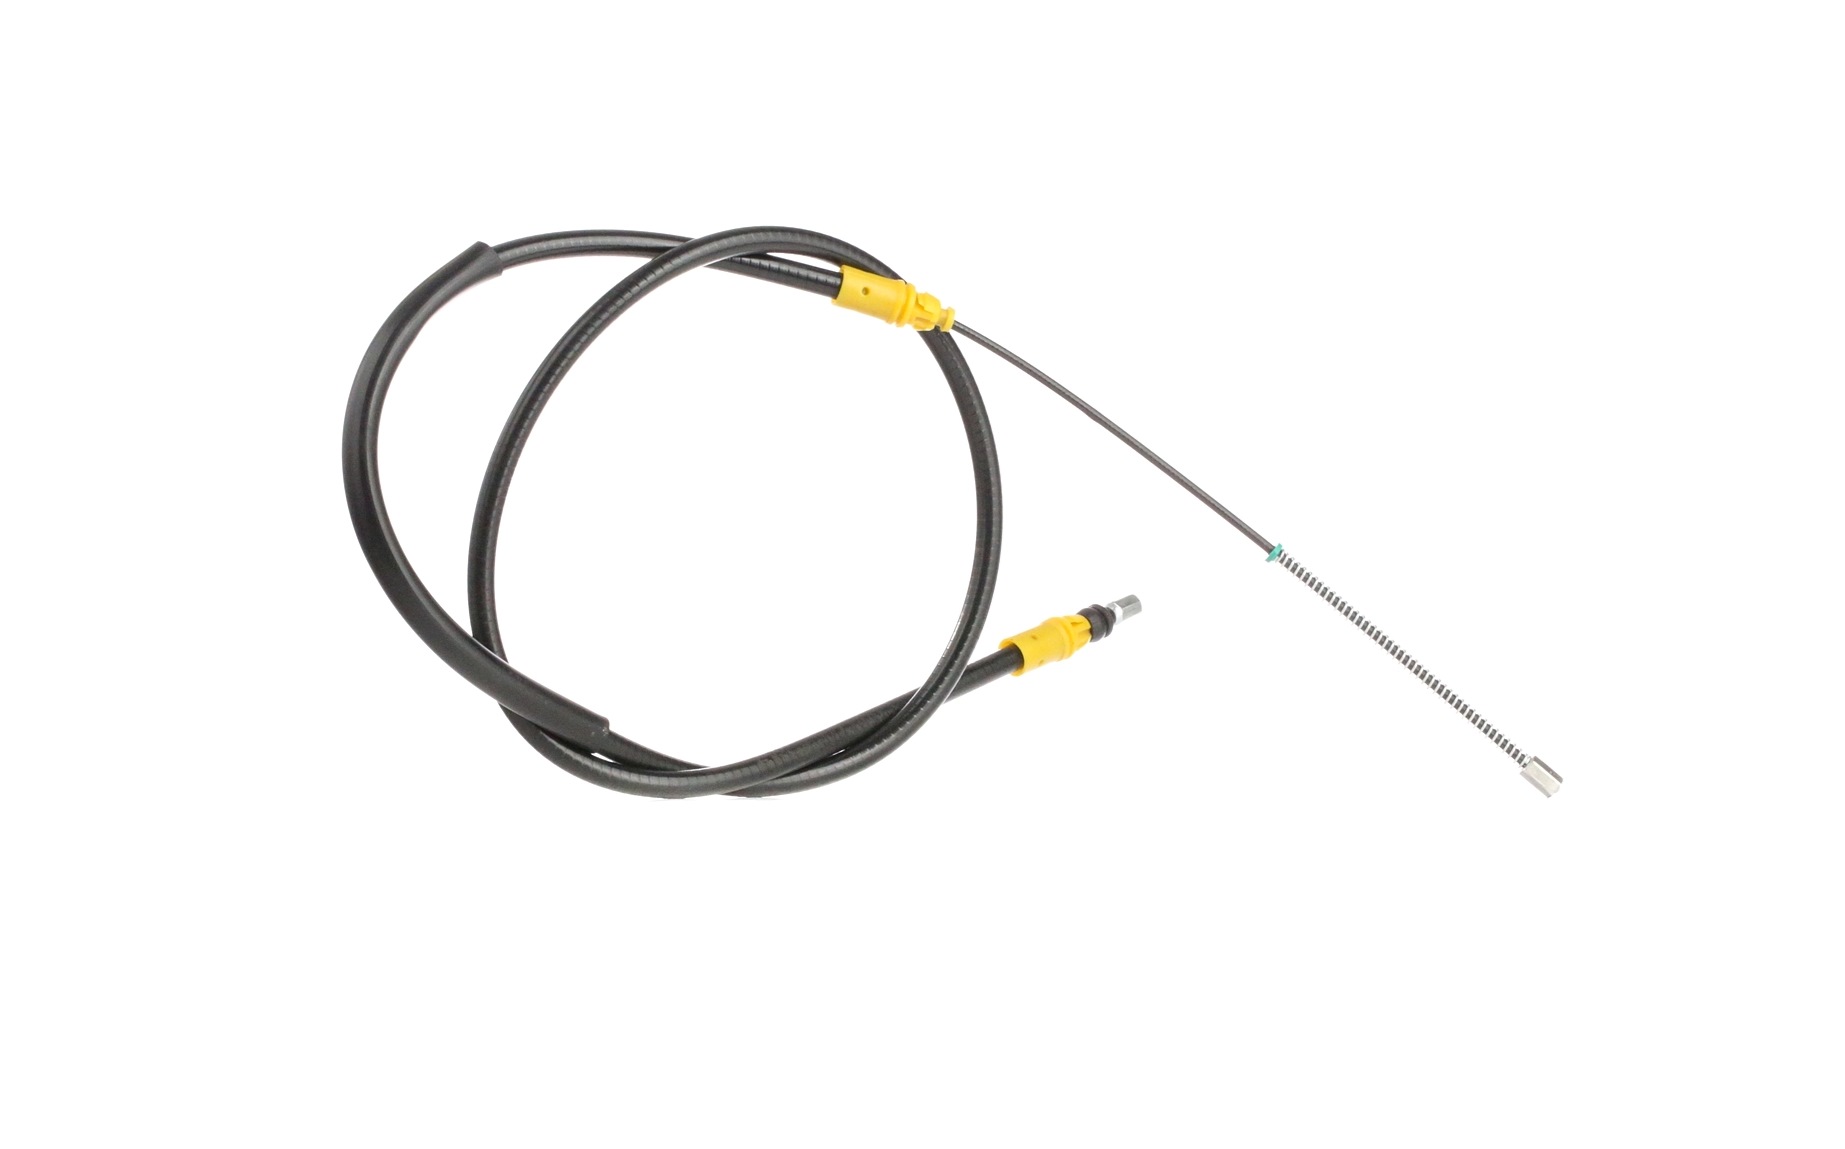 STARK SKCPB-1050163 Hand brake cable Right Rear, Left Rear, 1443/1125mm, Drum Brake, for vehicles with drum brakes on the rear axle, for parking brake